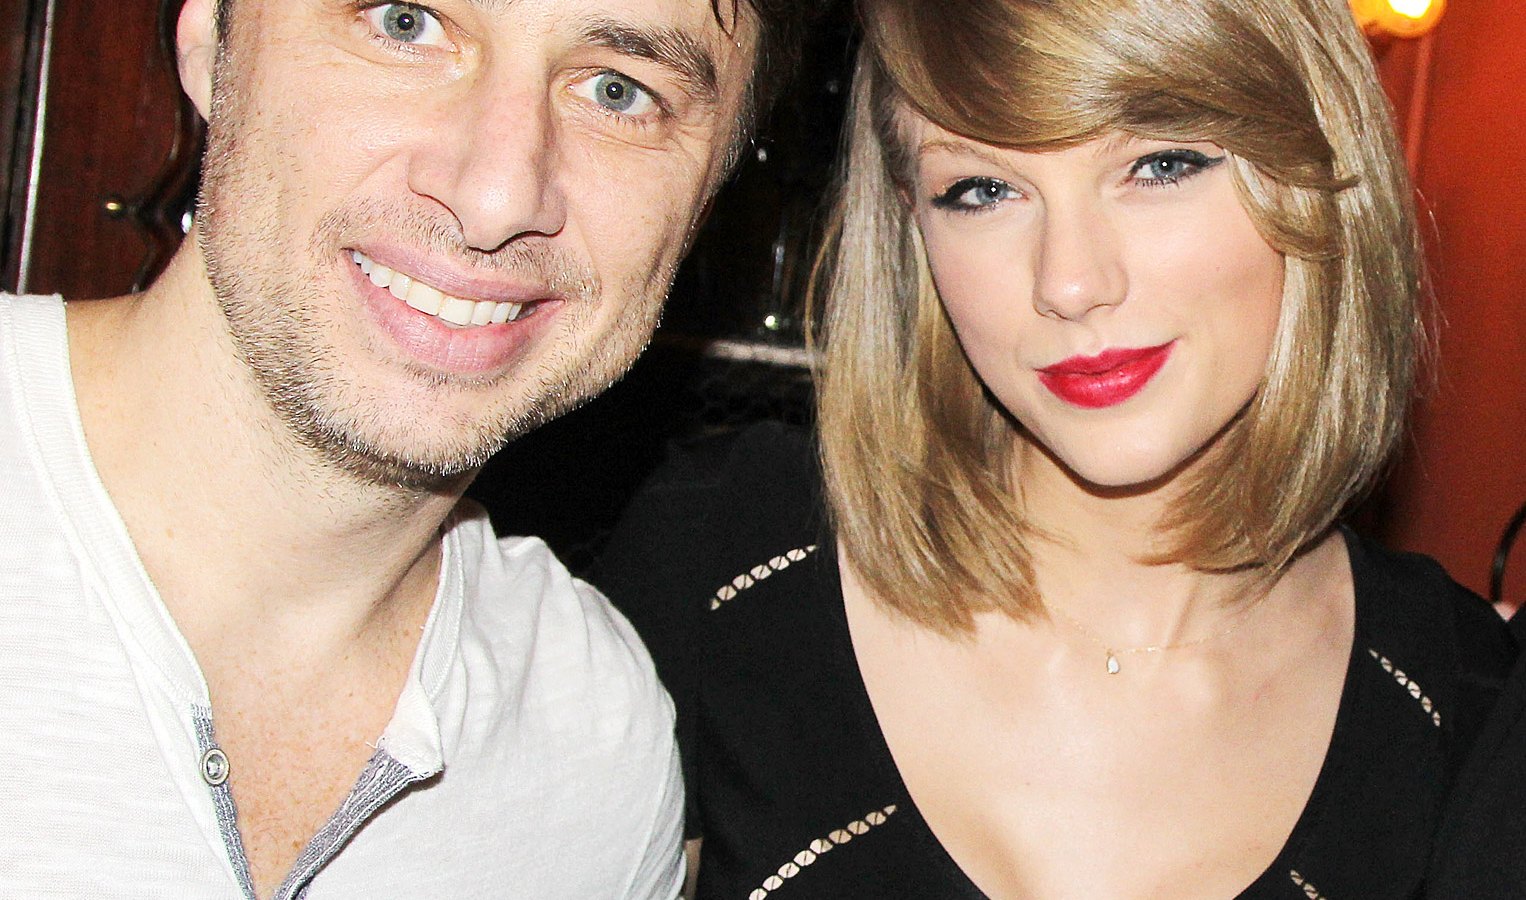 Zach Braff and Taylor Swift on March 29, 2014 in New York City